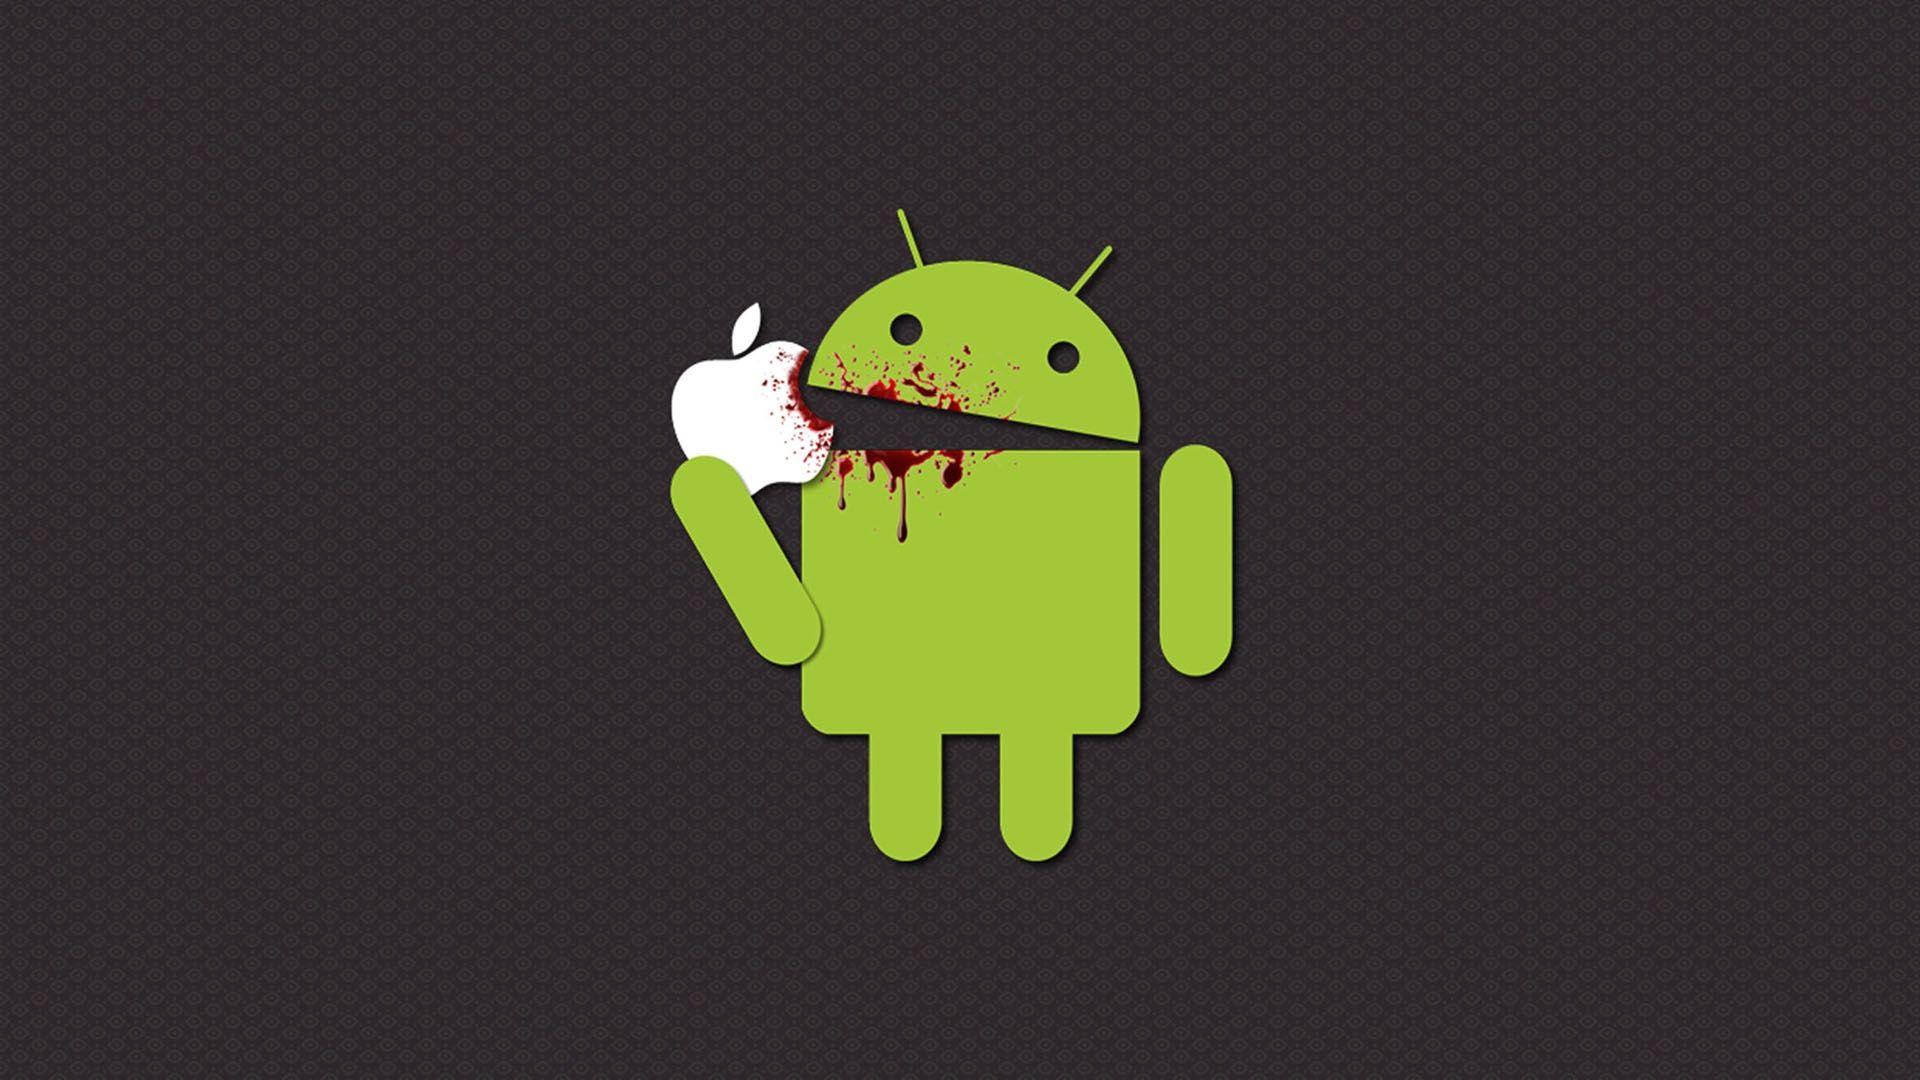 Cool Android Logo - wallpaper.wiki-Android-Logo-Pictures-Cool-Free-Download-PIC ...